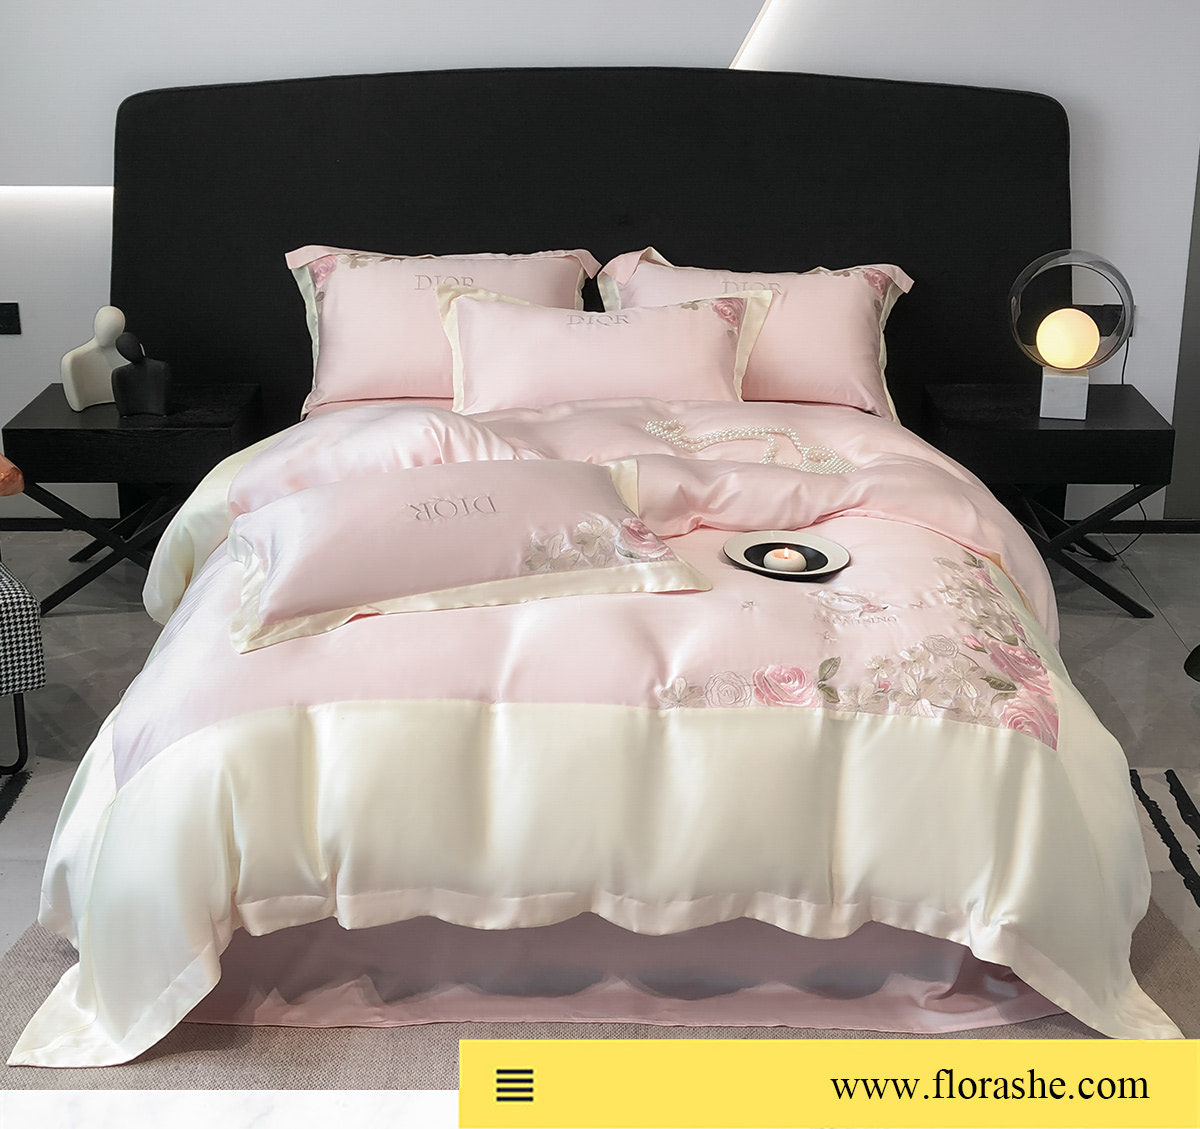 Aesthetic-Embroidery-Home-Textiles-Duvet-Cover-Bedding-Set20